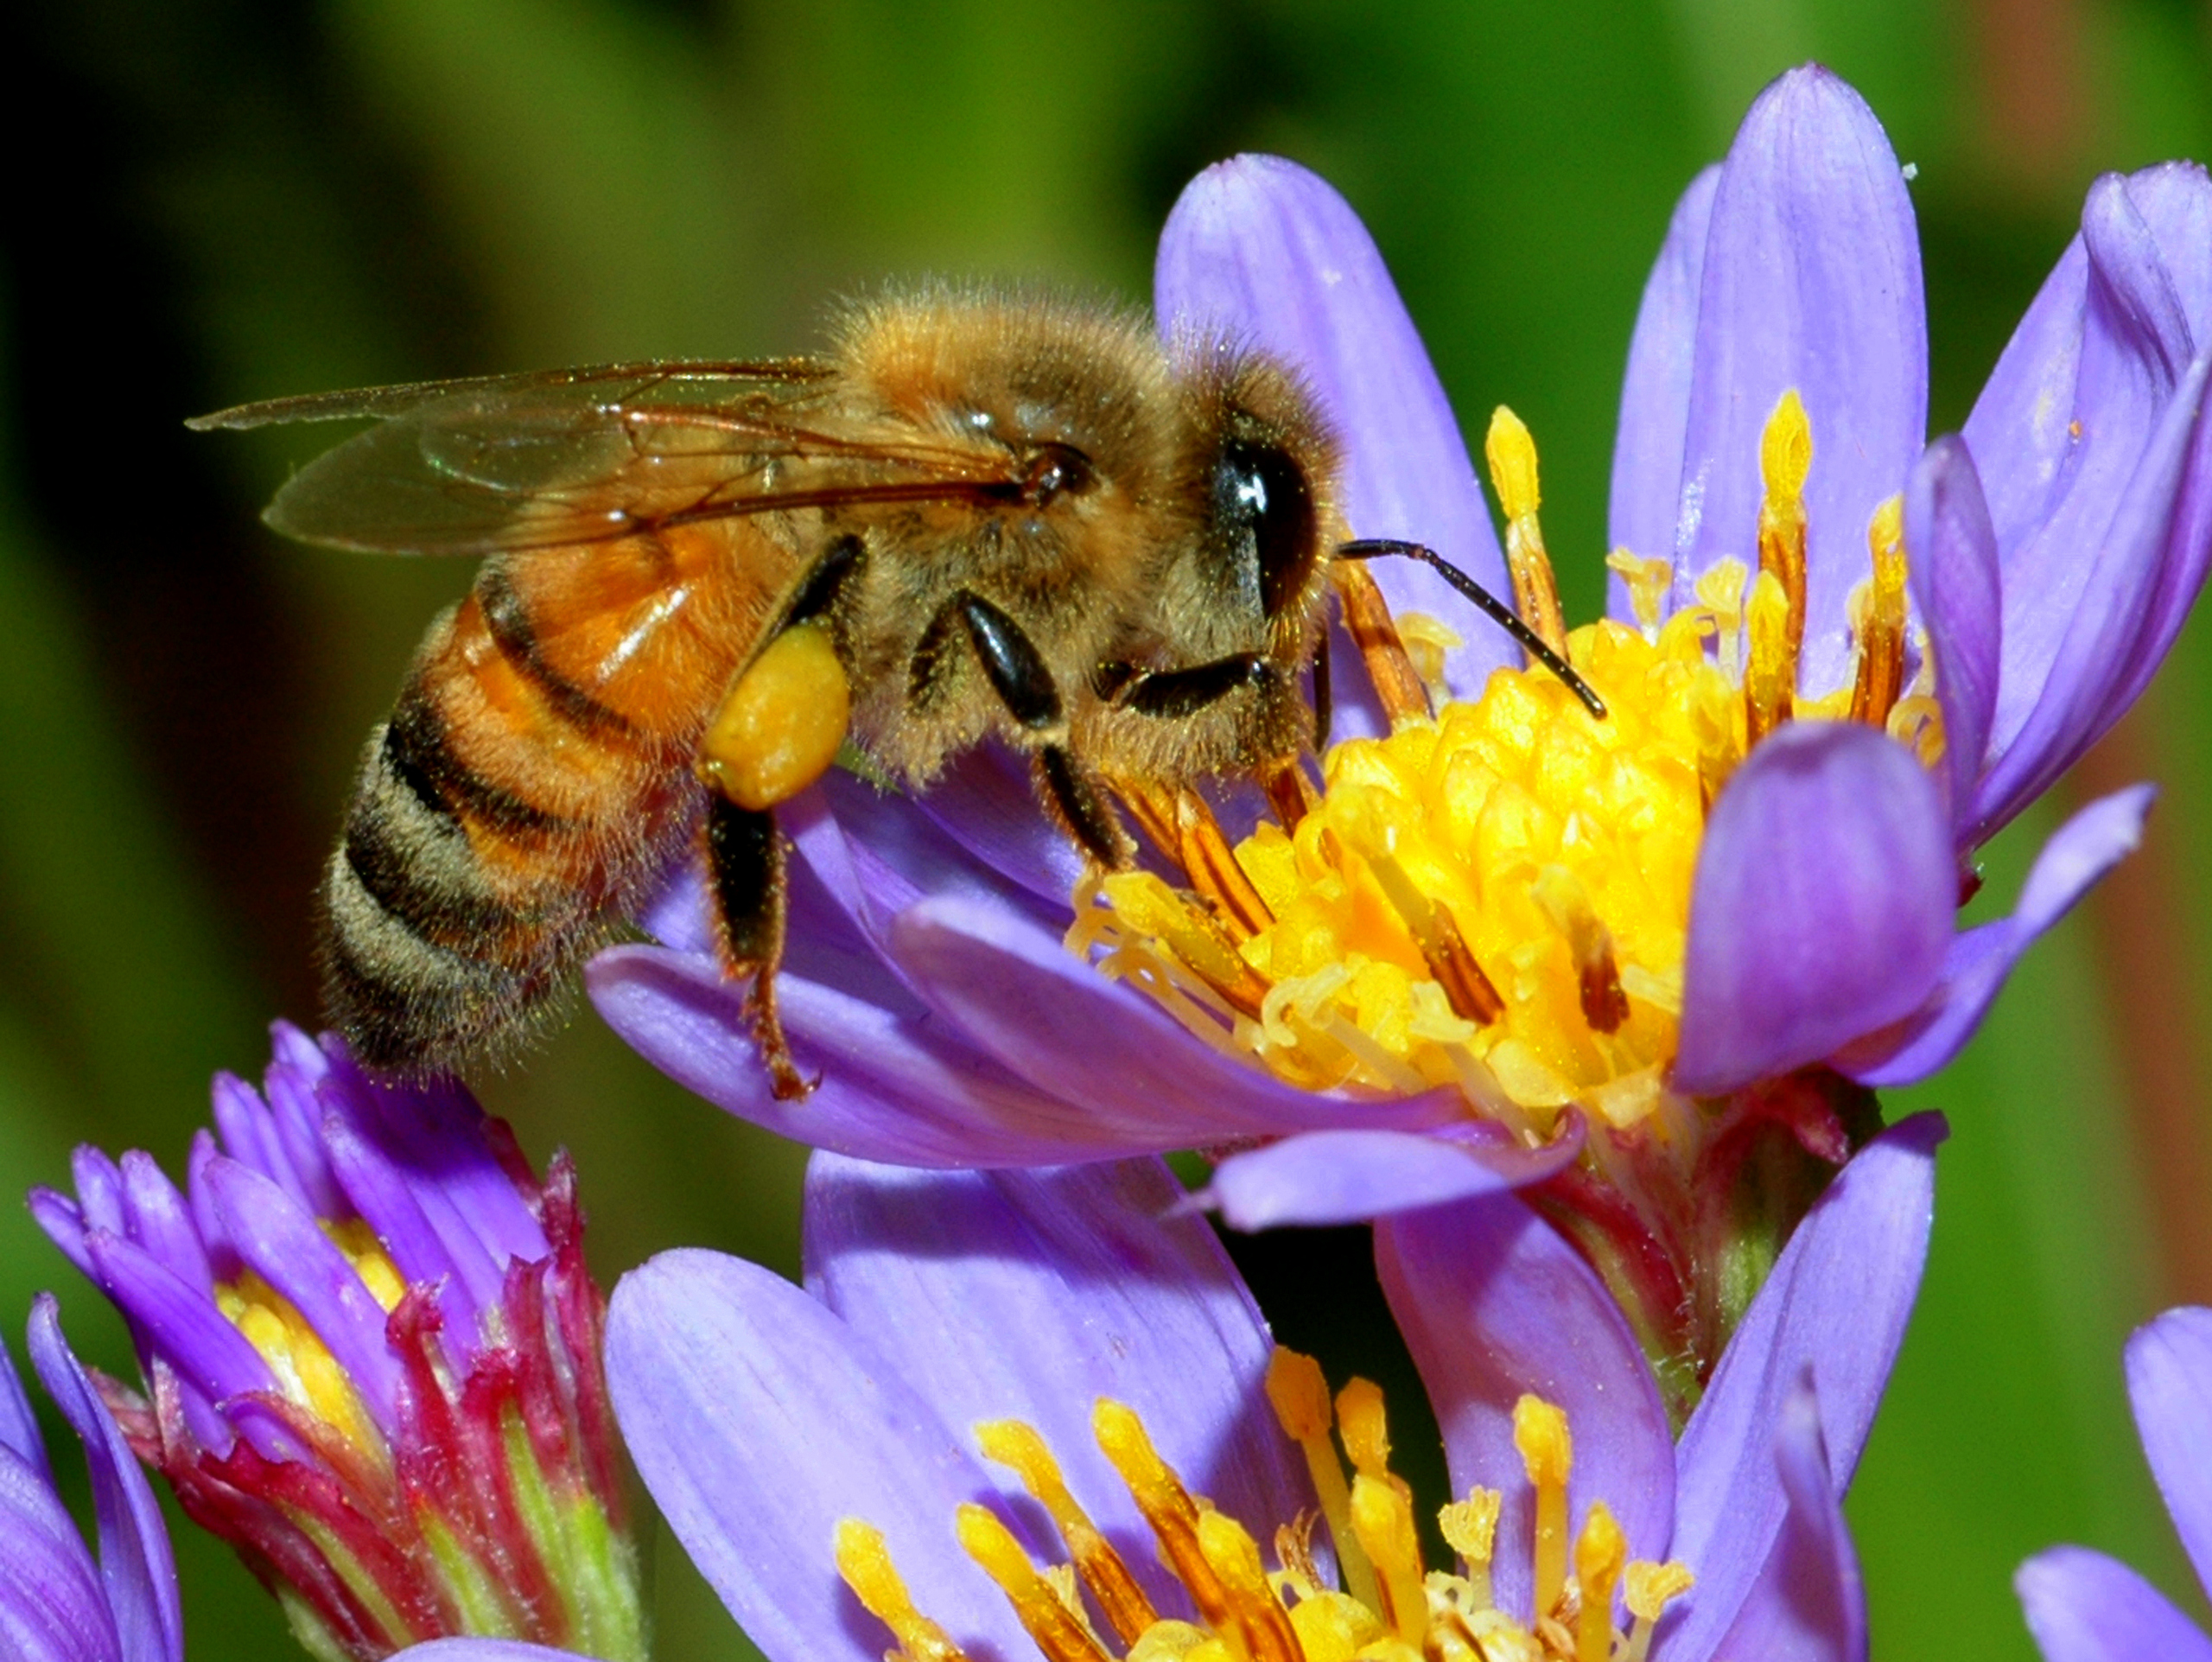 Help stop toxic pesticides from pushing pollinators toward extinction